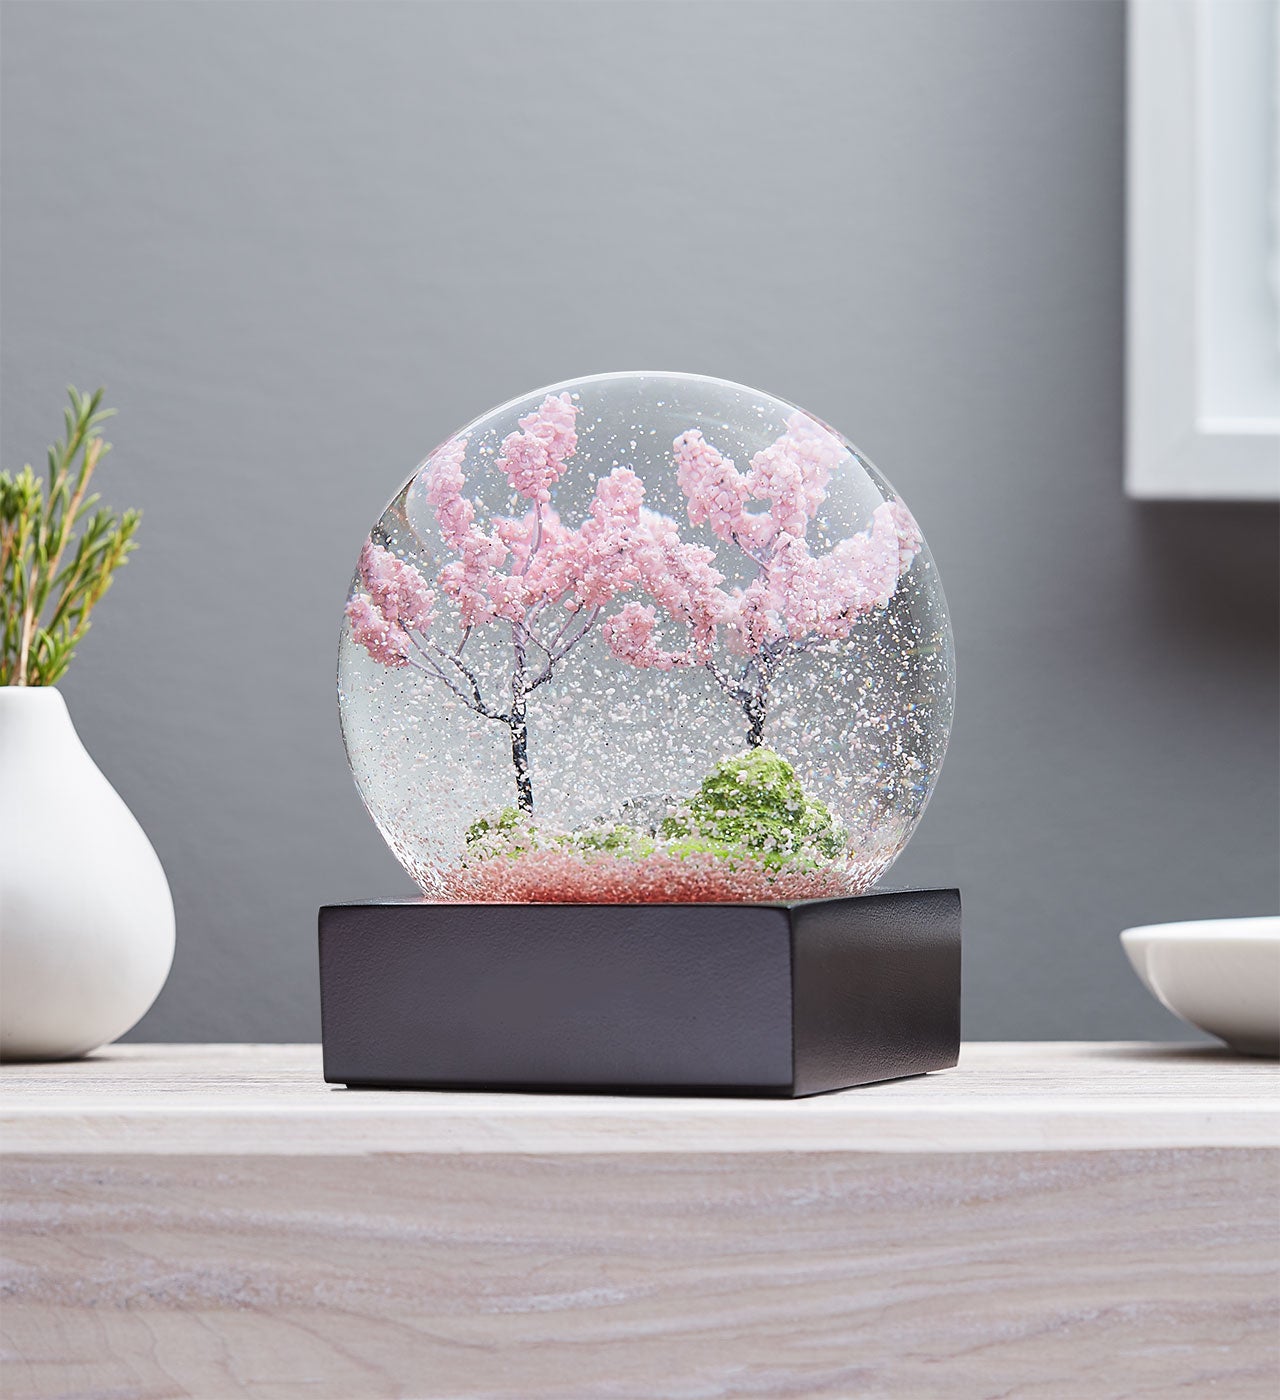 Cherry Blossom Snow Globe by CoolSnowGlobes